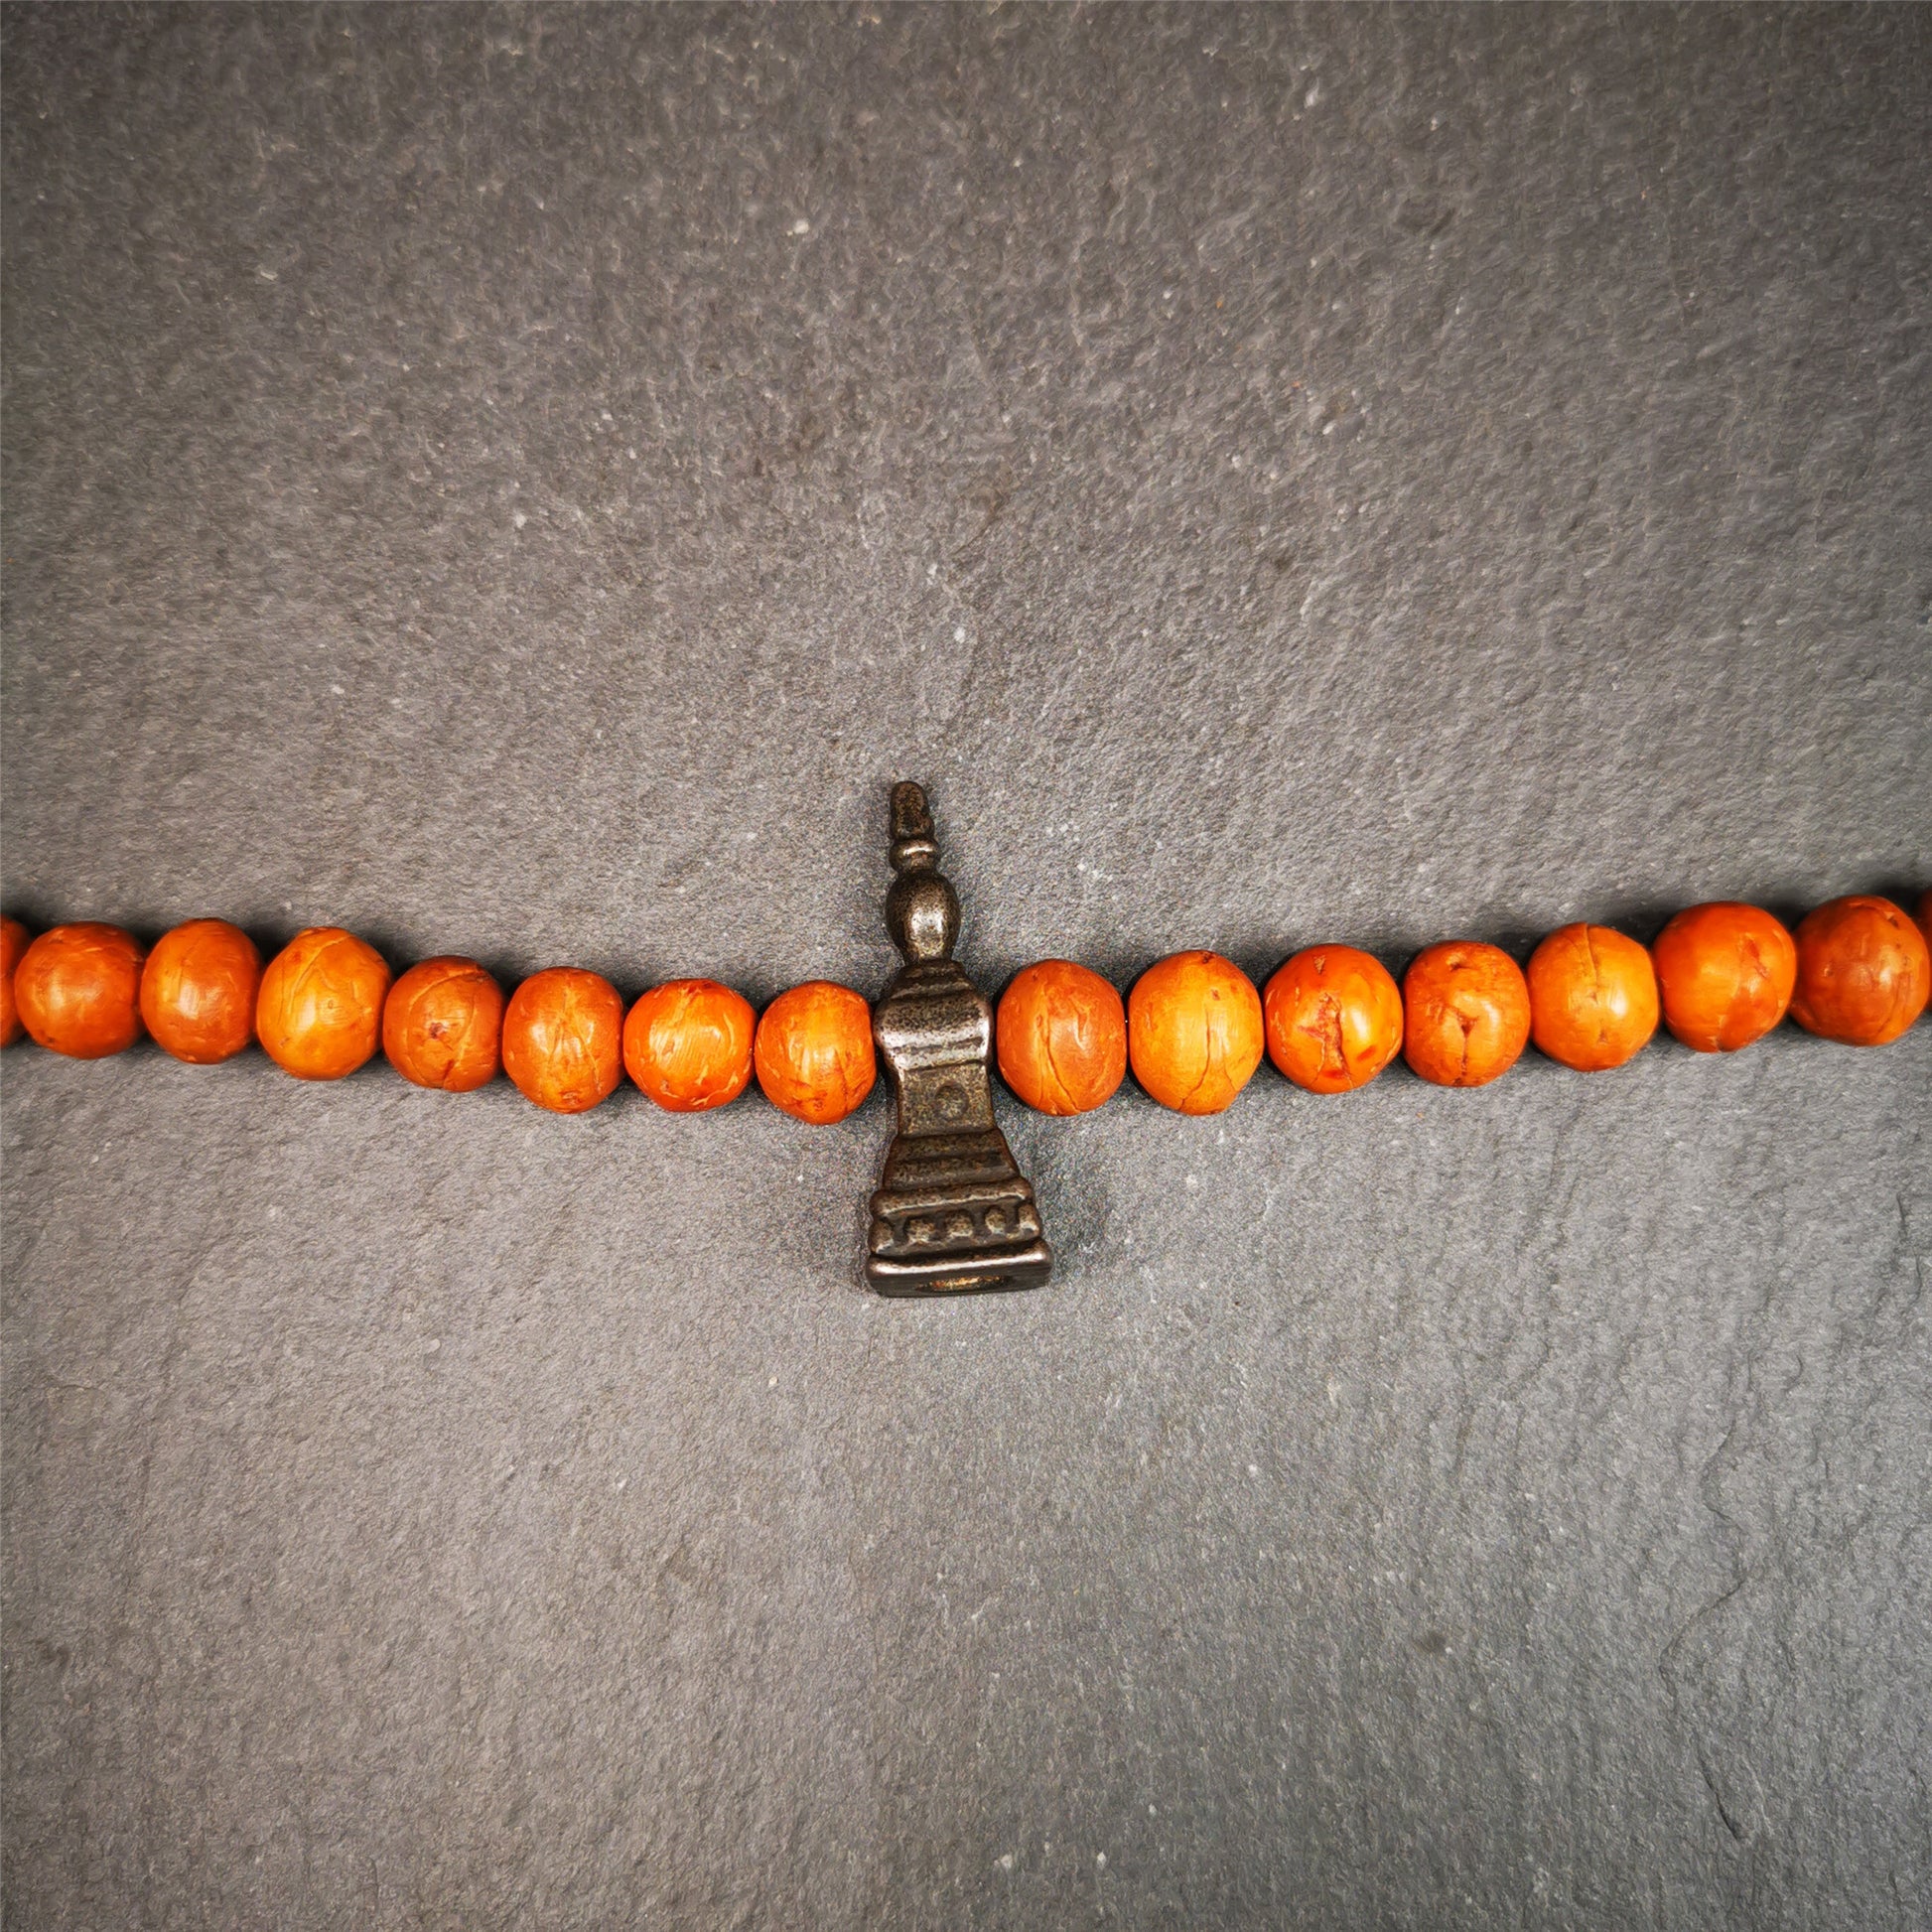 This stupa amulet pendant wss hand carved by Tibetan craftsmen from Tibet in 1990's. From Hepo Town, Baiyu County, the birthplace of the famous Tibetan handicrafts. It was made of cold iron,black color,1.22 inches heiht. You can make it necklace pendant,mala pendant,keychain, or just put it on your desk,as an ornament.